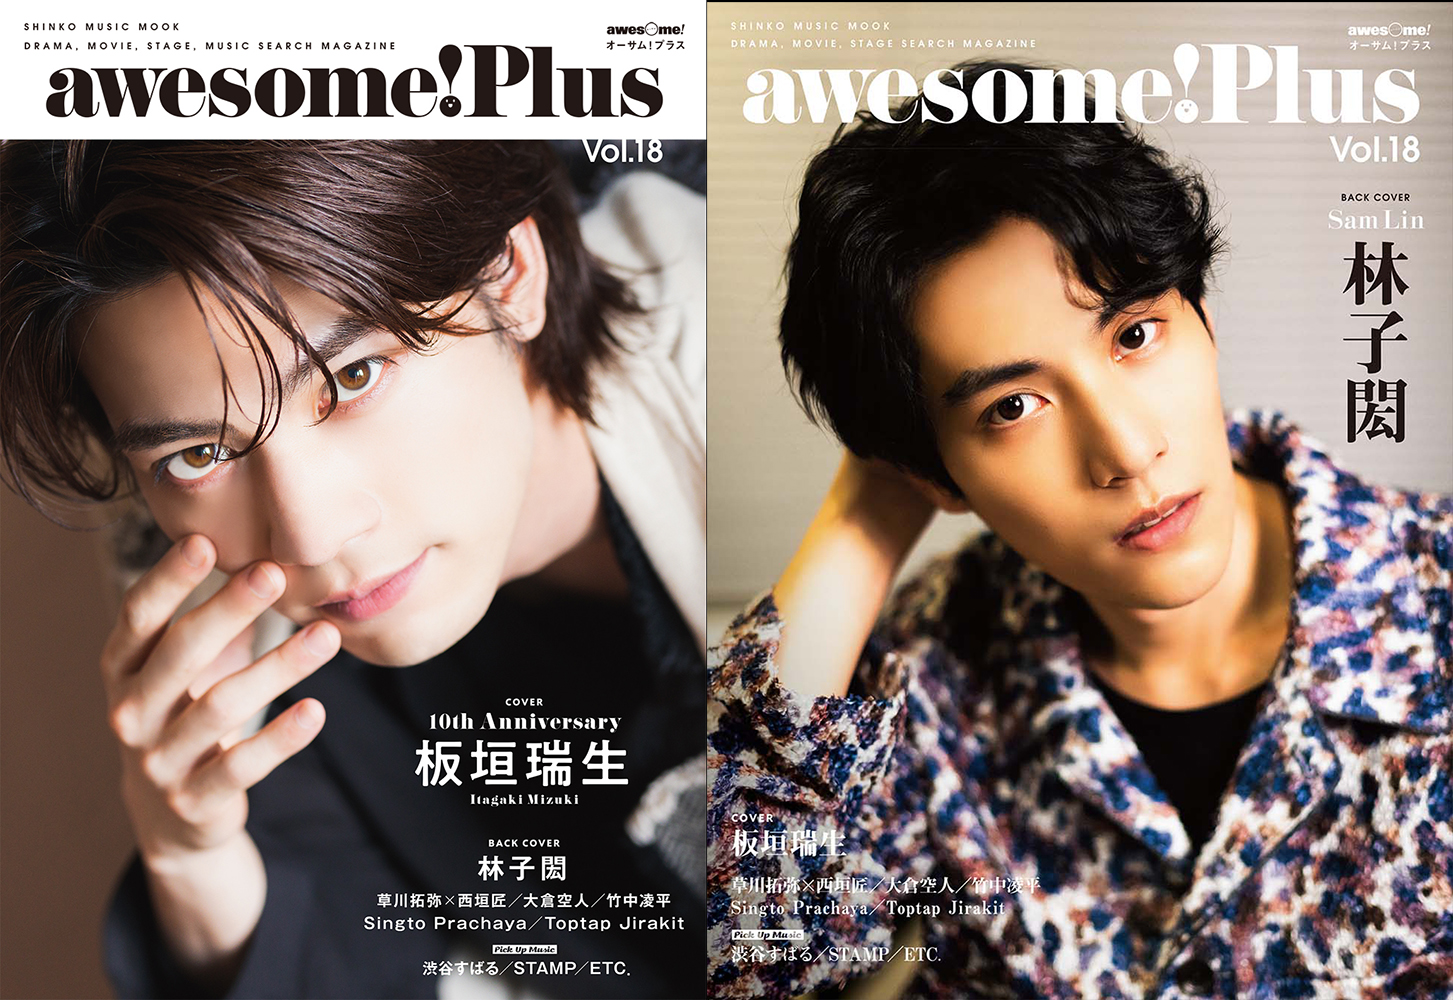 awesome! Plus Vol.18 7月6日発売！ | awesome